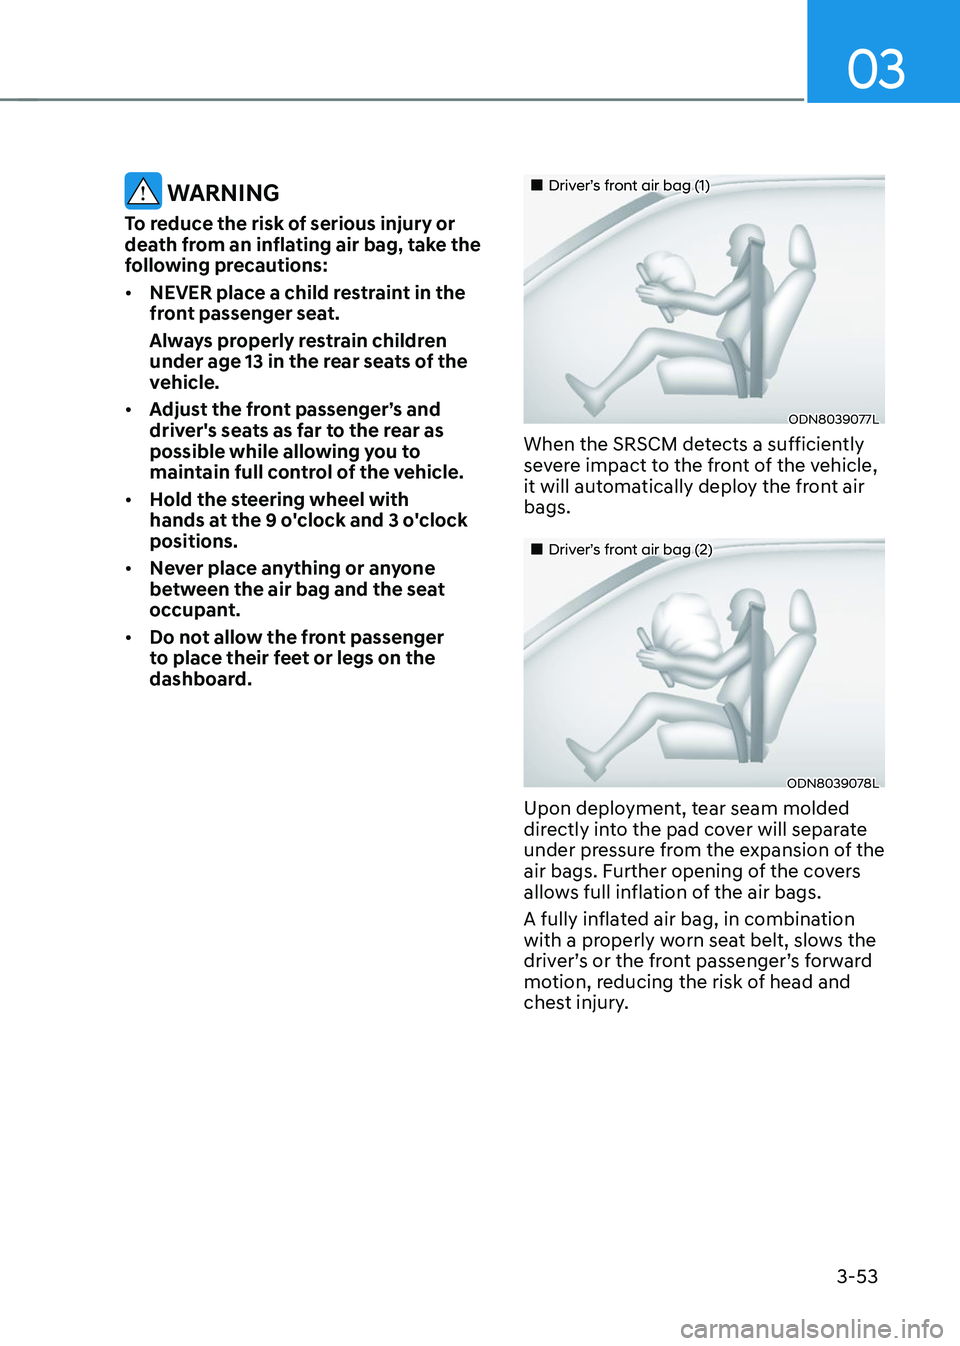 HYUNDAI TUCSON 2023  Owners Manual 03
3-53
 WARNING
To reduce the risk of serious injury or 
death from an inflating air bag, take the 
following precautions:
•	NEVER place a child restraint in the 
front passenger seat.
Always prope